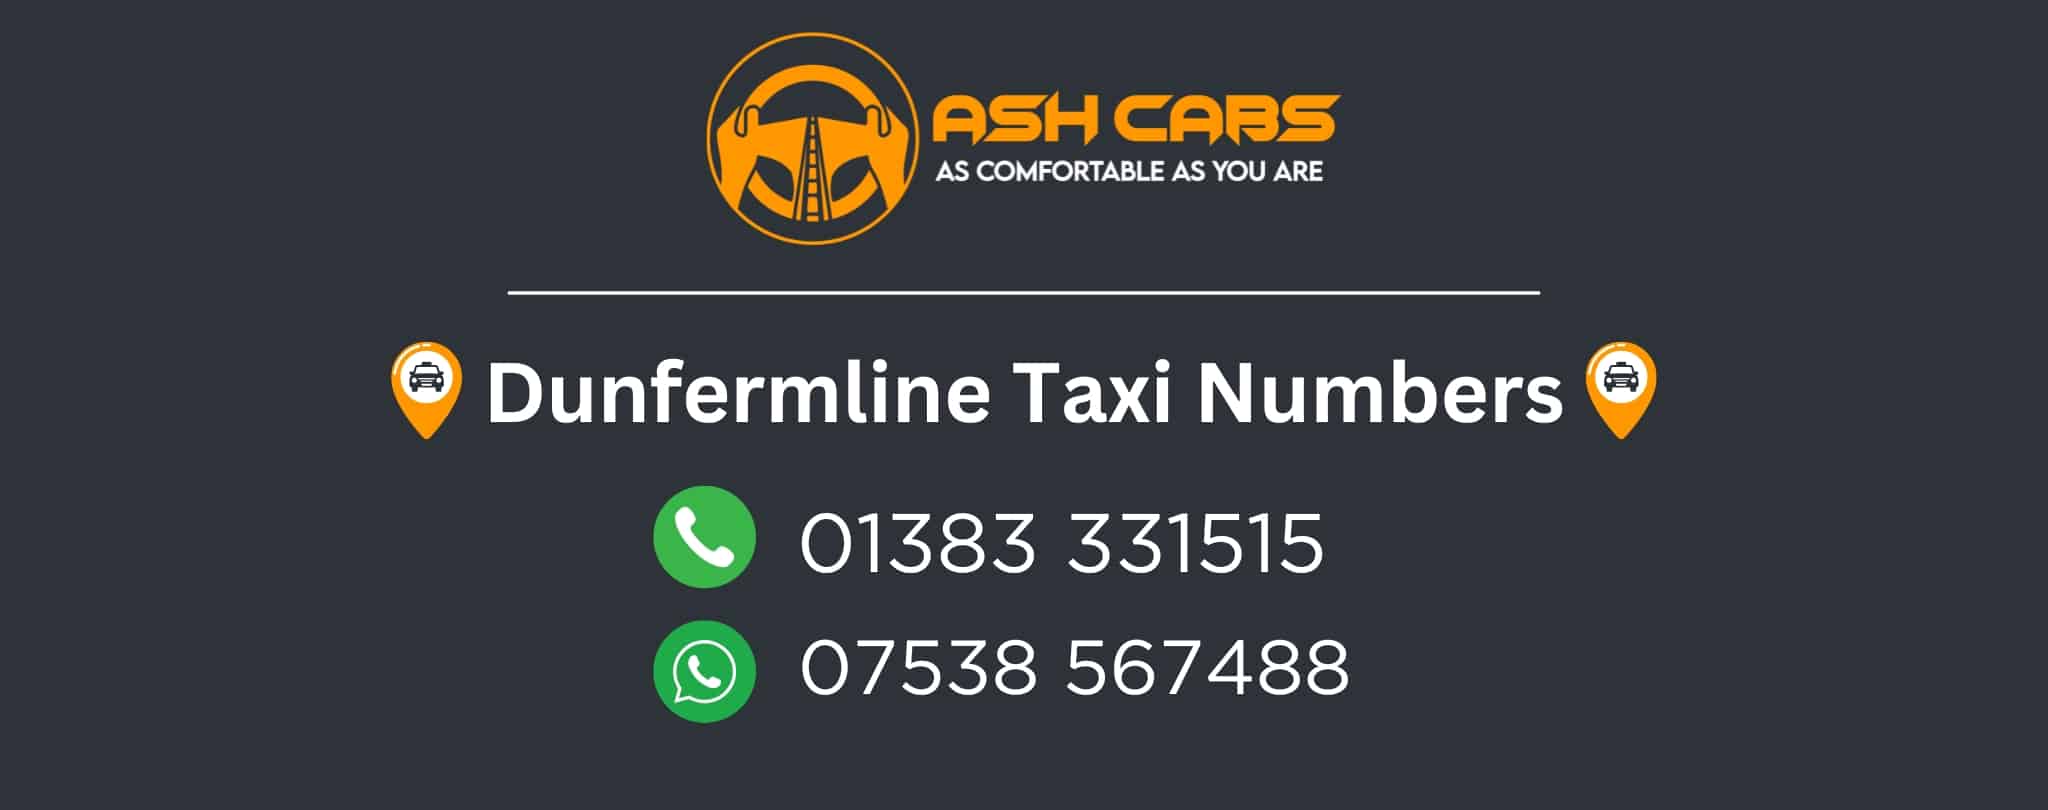 Taxi Near Dunfermline - Dunfermline Taxi Numbers